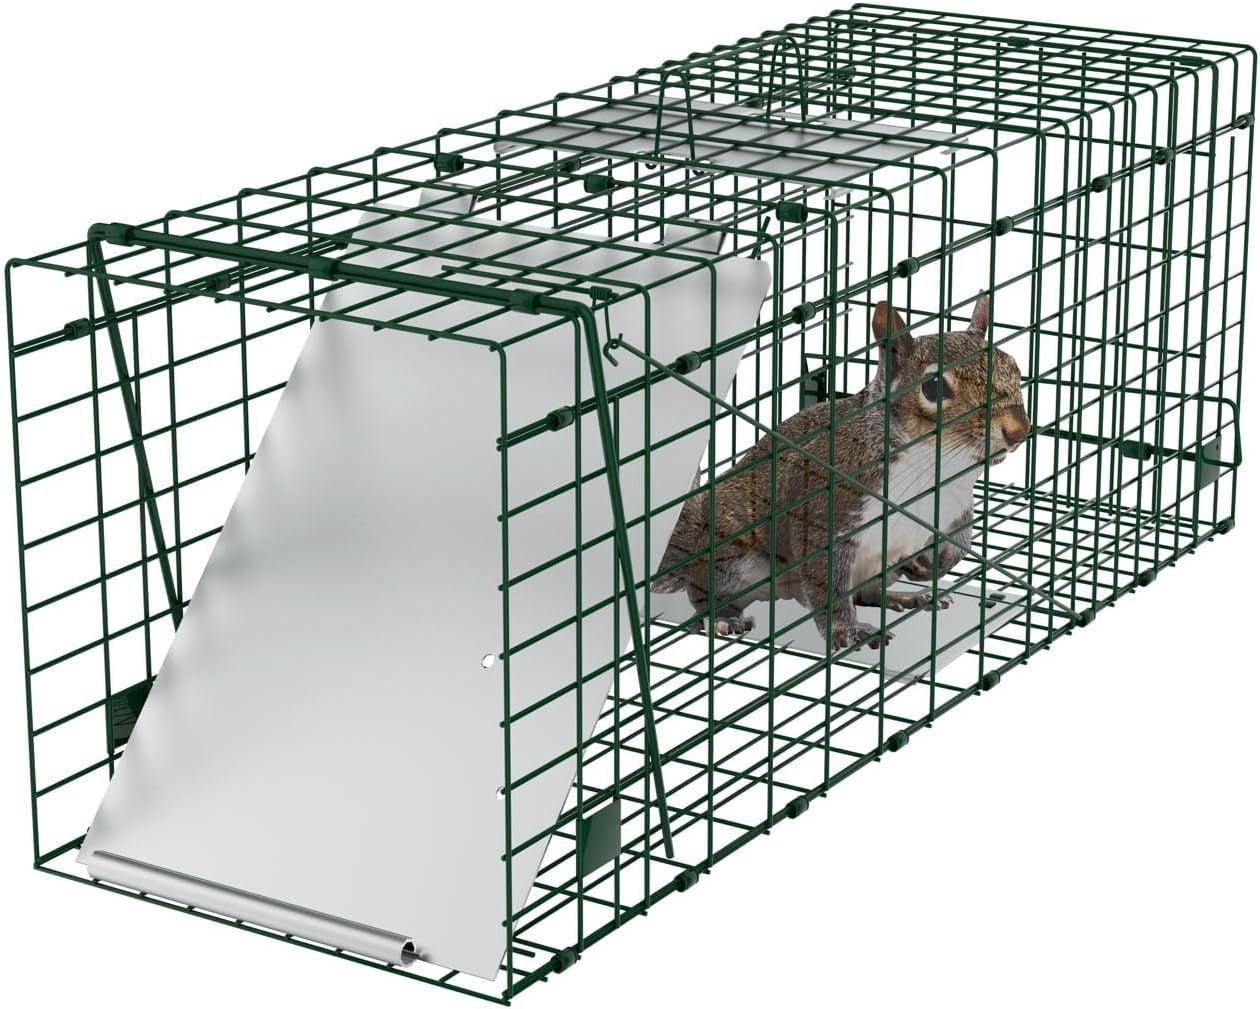 Luxtrada Small Animal Humane Live Cage Rat Mouse Mice Chipmunk